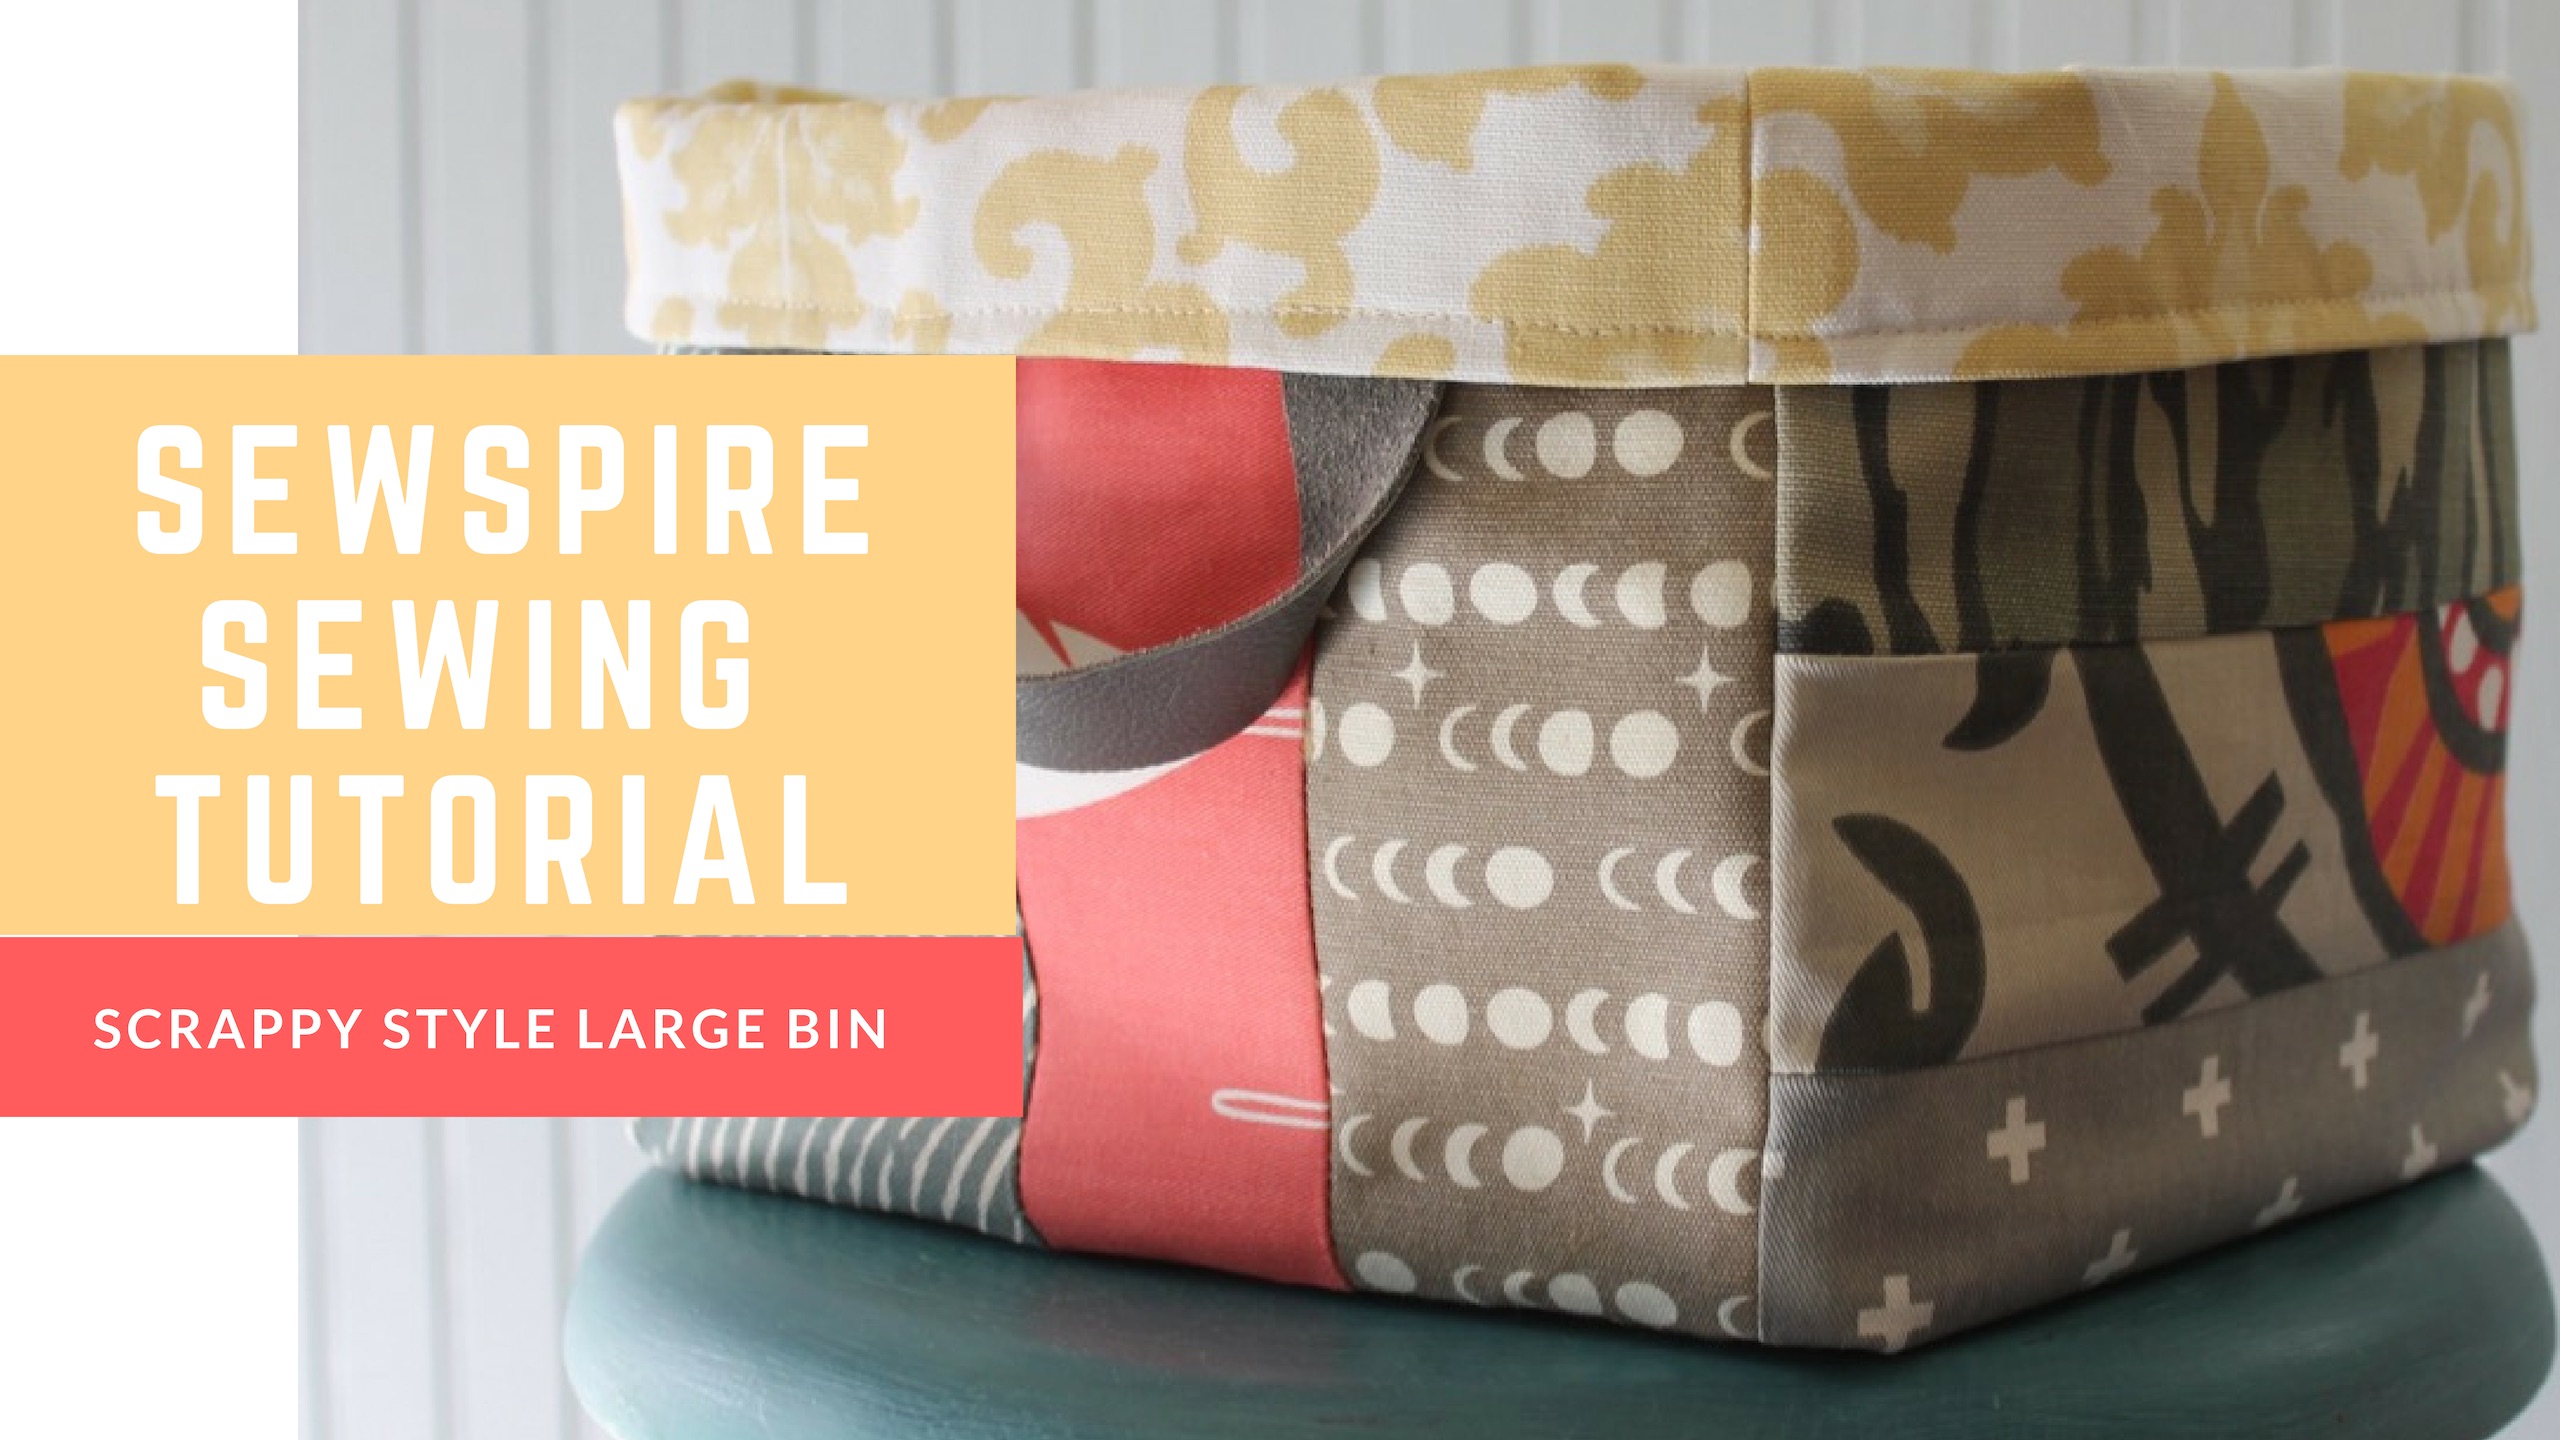 How to sew a scrappy style large bin